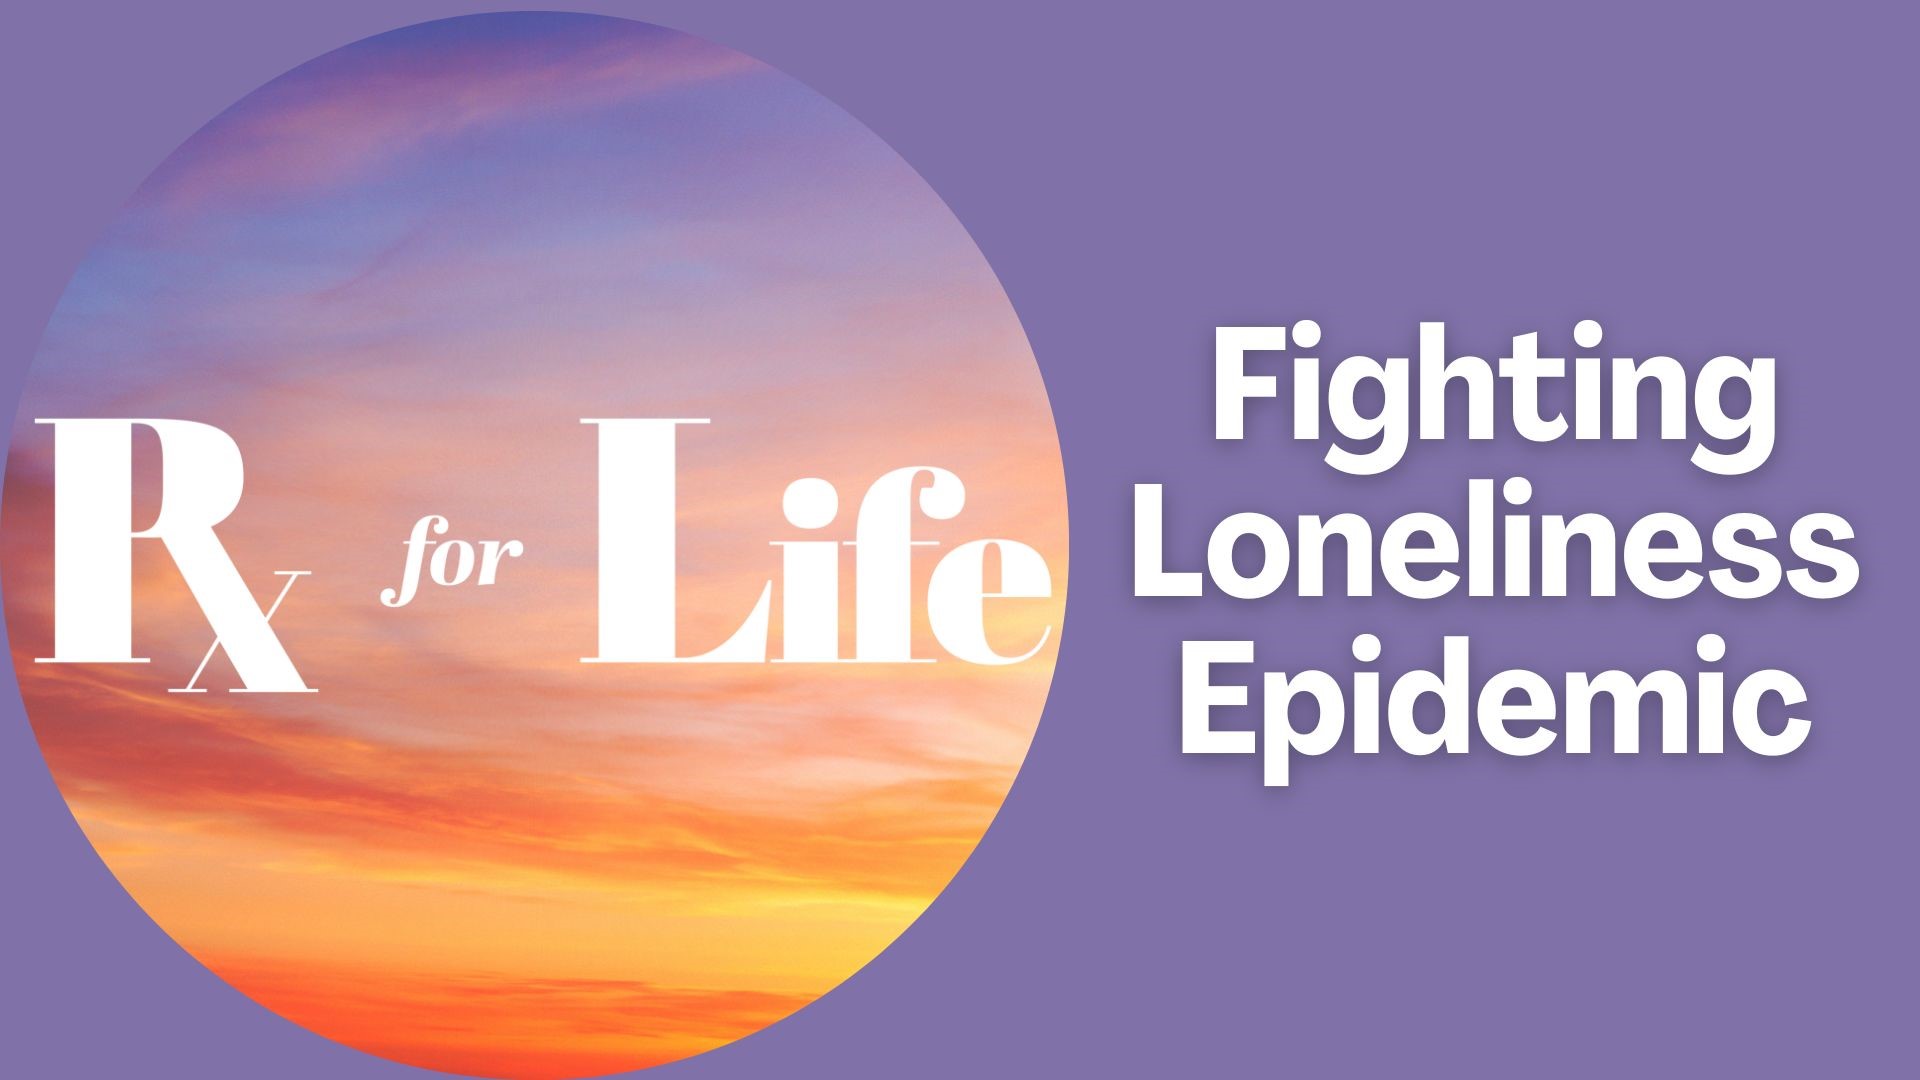 Monica Robins talks with an expert about the epidemic of loneliness. The health risks associated with loneliness and how you can overcome it.